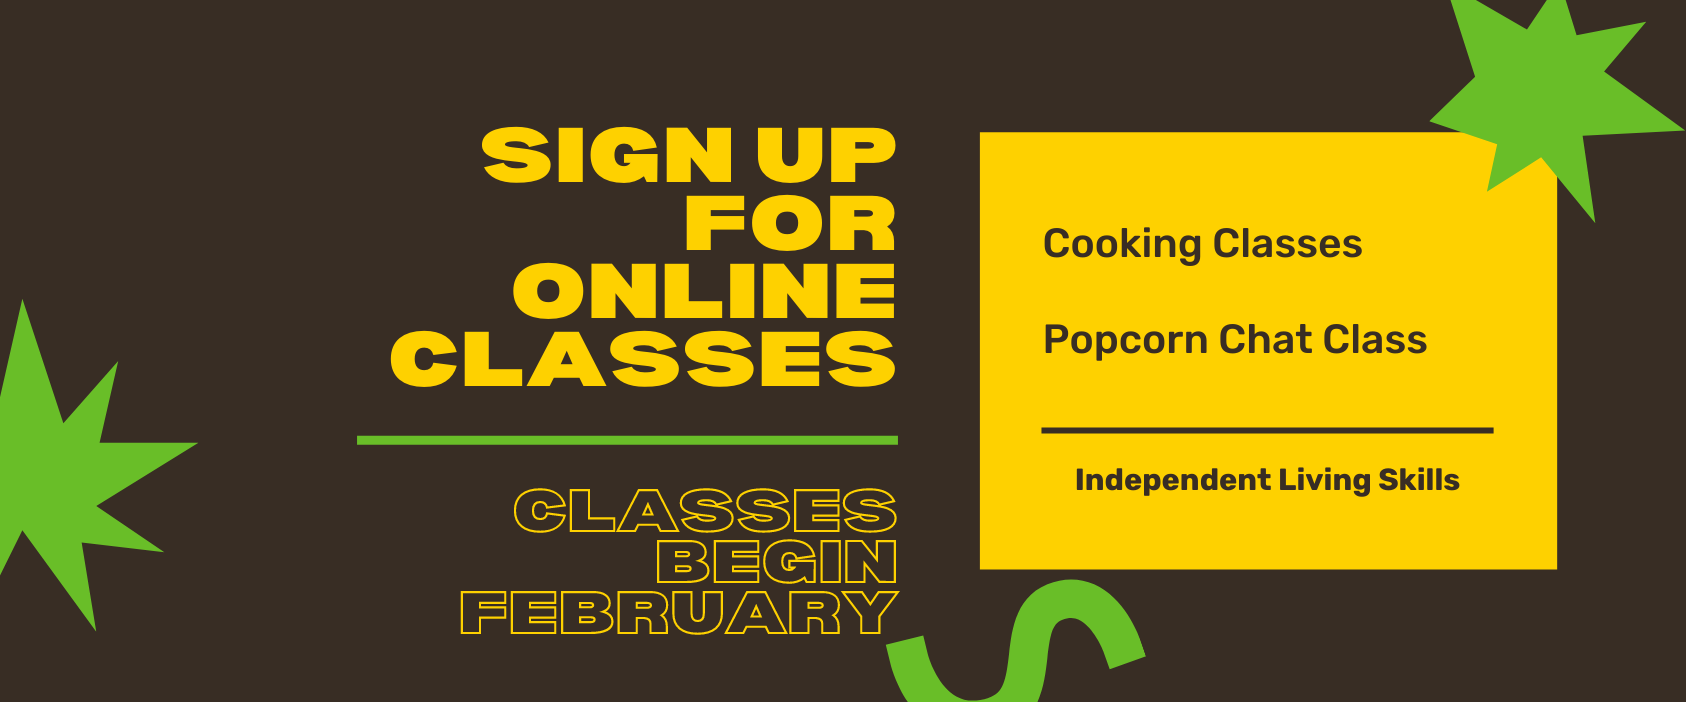 Signup for online classes